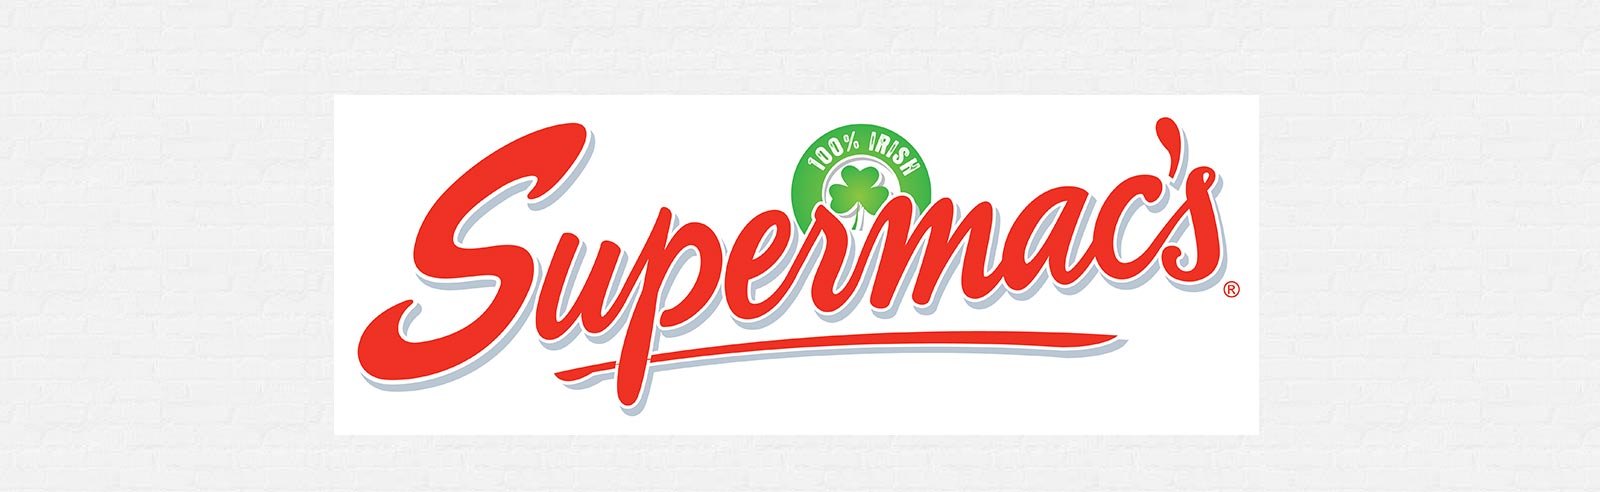 Supermac’s submits new EU Trademark Application